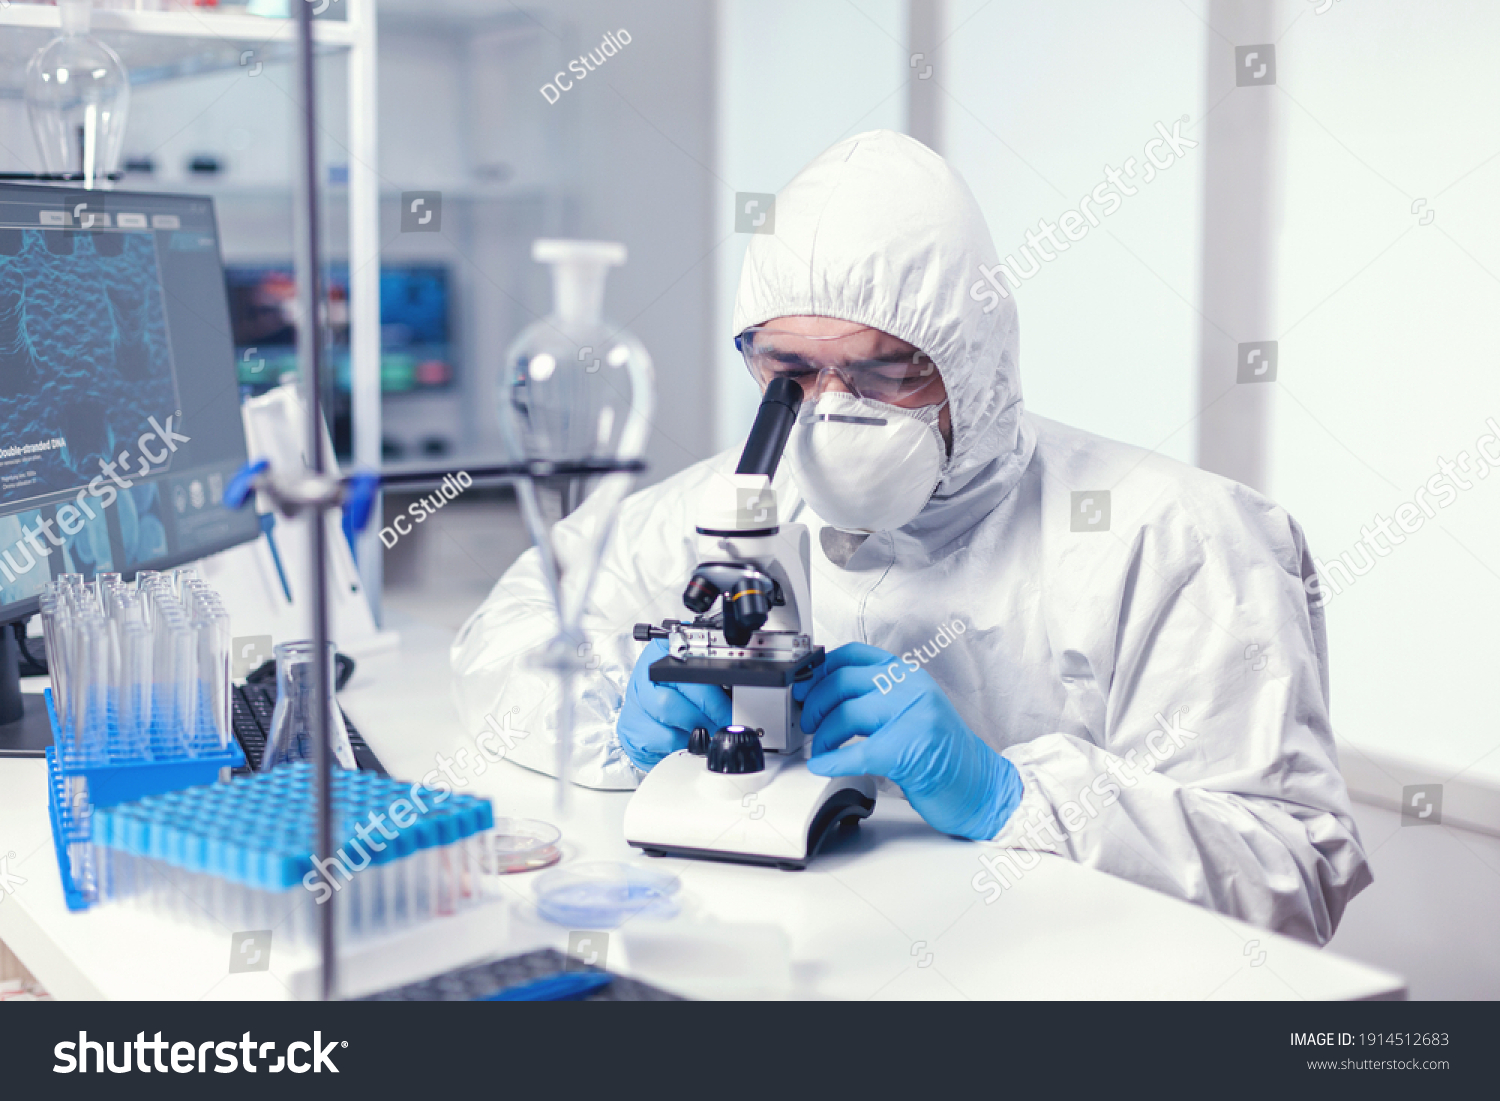 Analyzing virus in microbiology lab using microscope wearing ppe suit and glasses. Virolog in coverall during coronavirus outbreak conducting healthcare scientific analysis. #1914512683